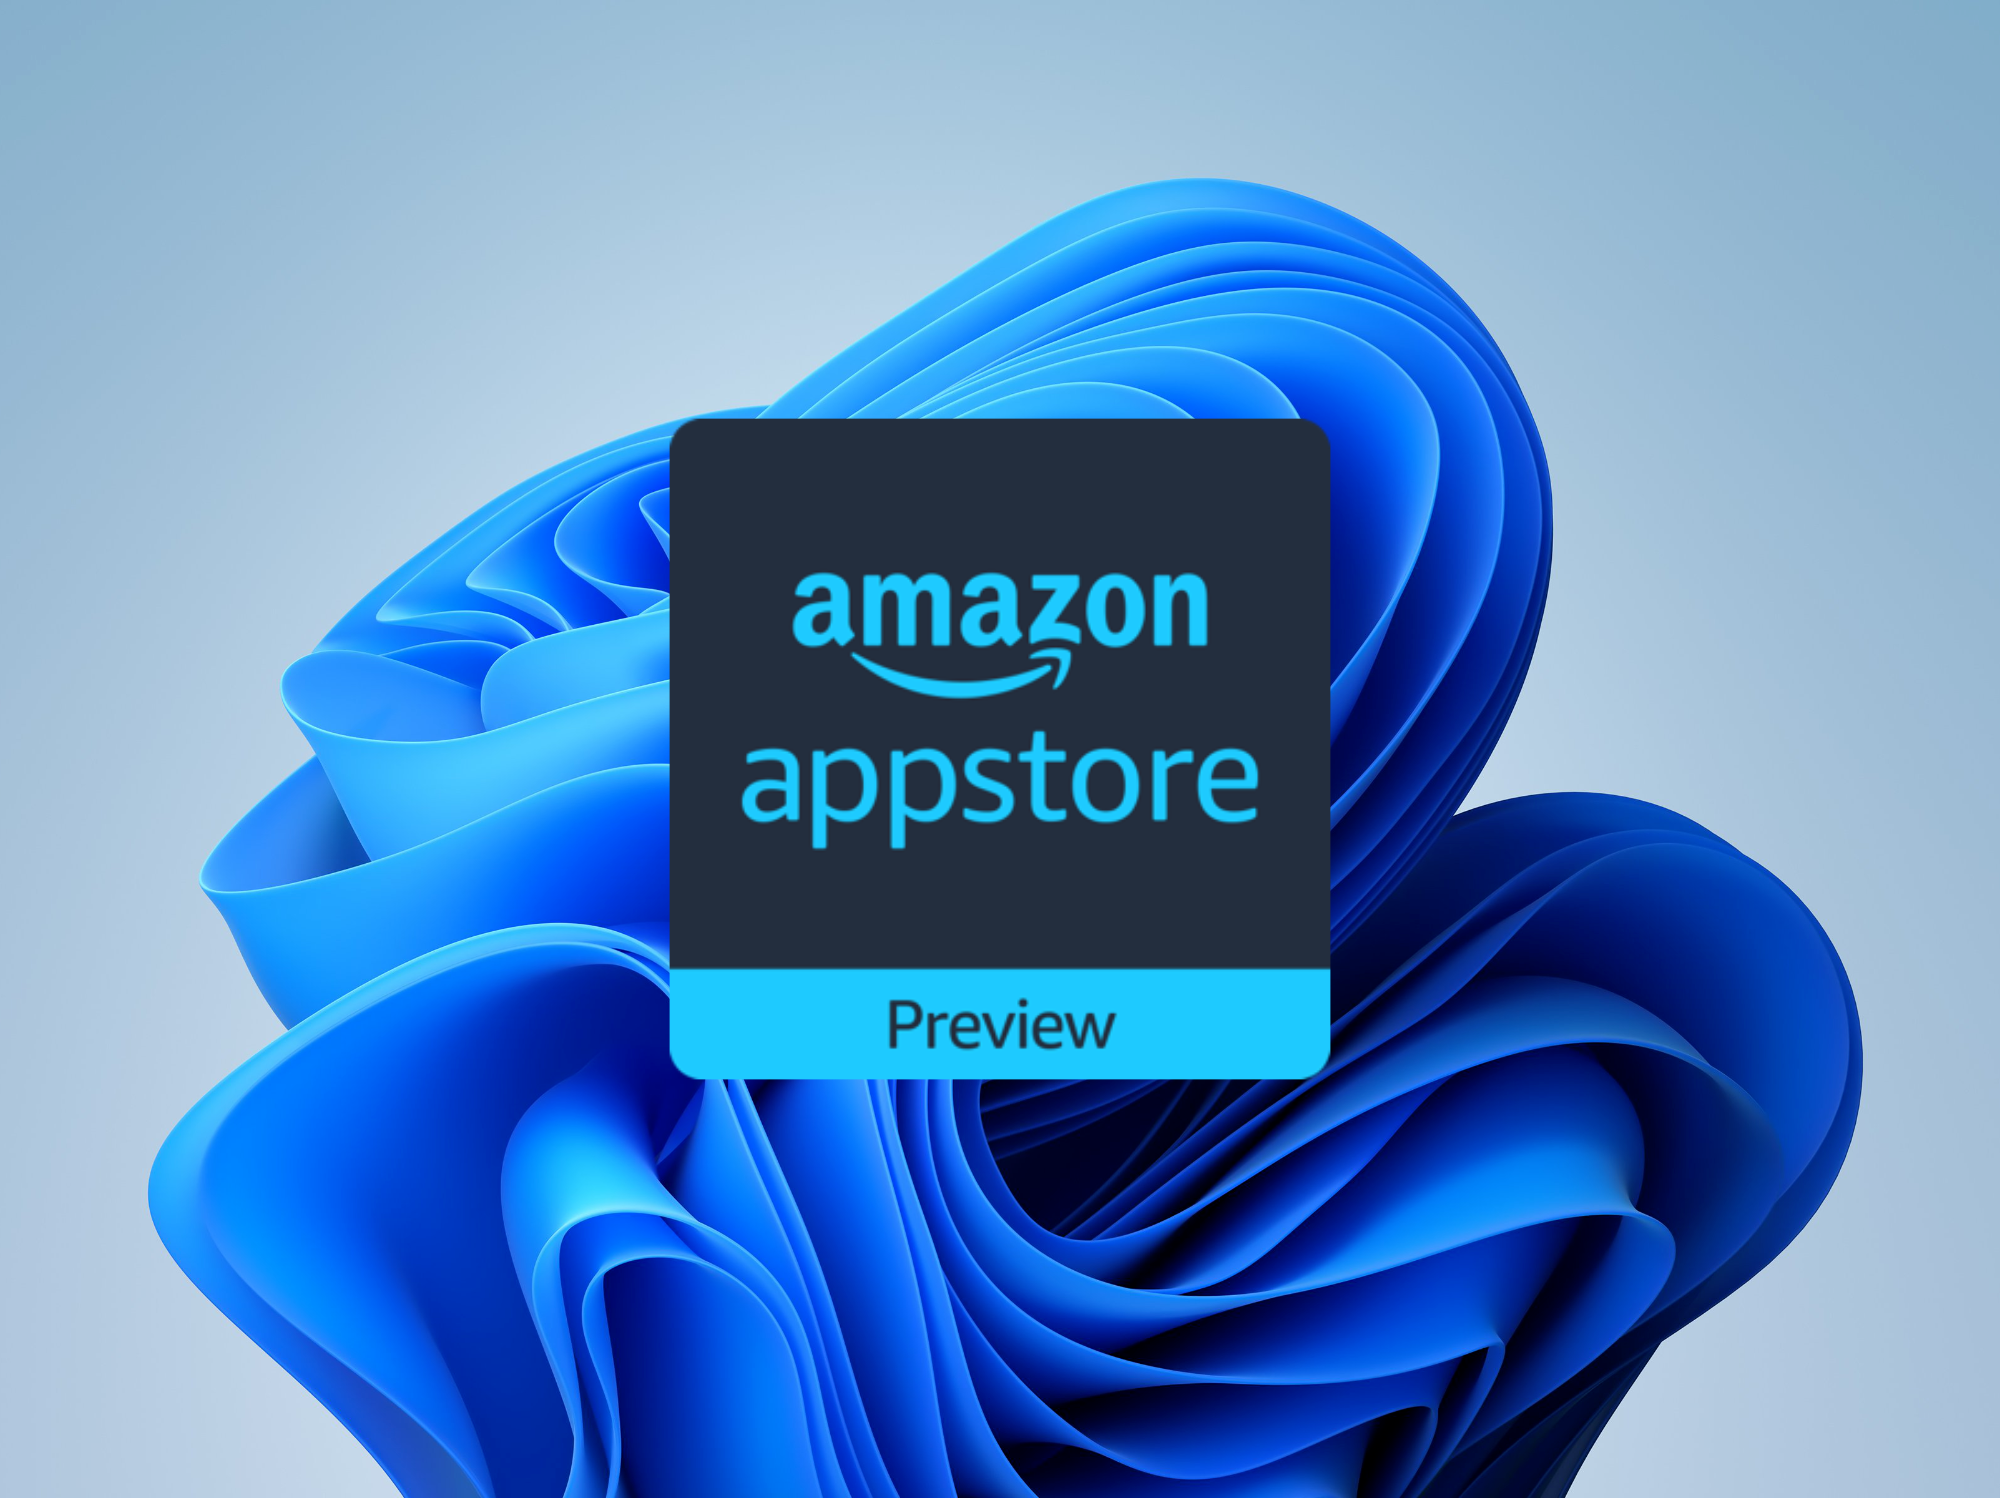 Amazon Appstore app listing pops up on the Microsoft Store